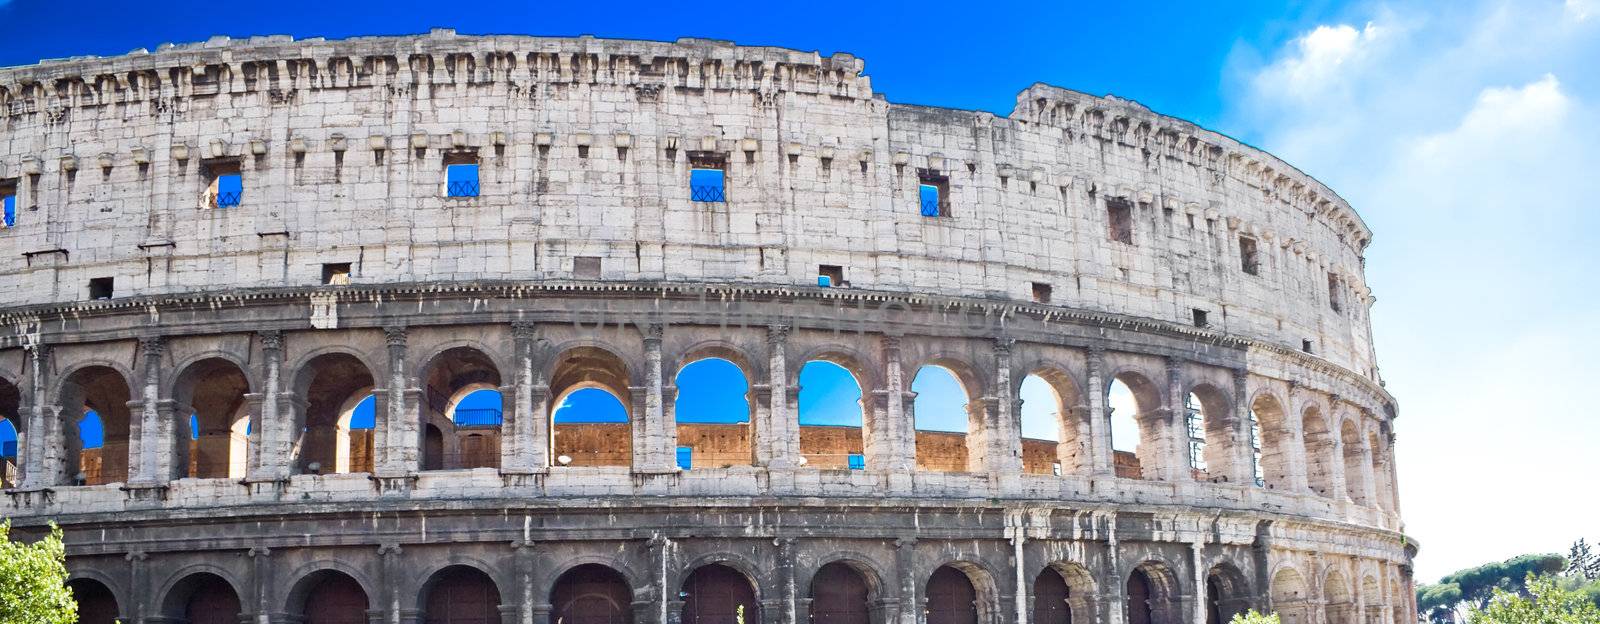 Panoramic view of famous ancient Colosseum in Rome